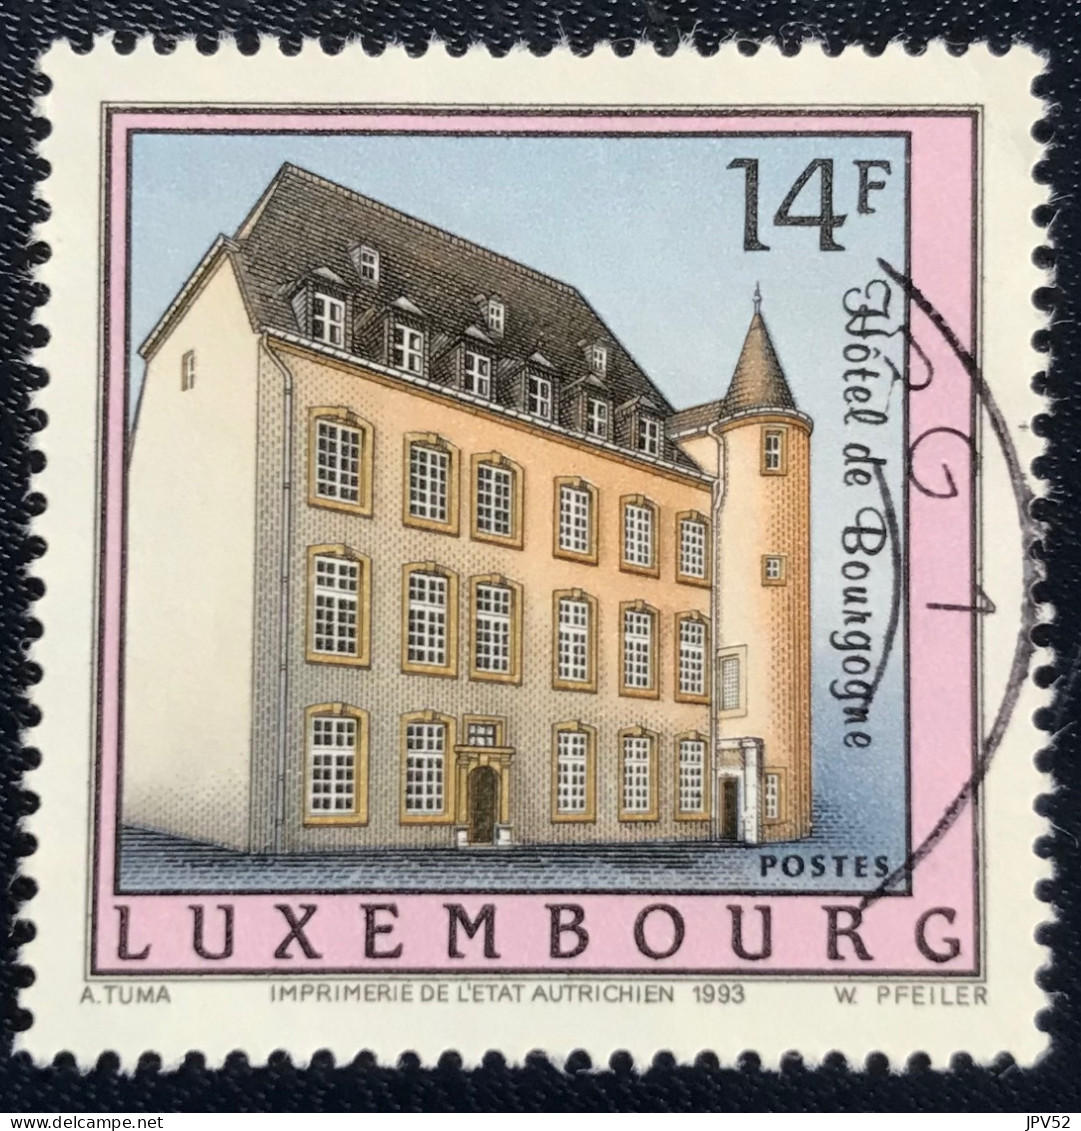 Luxembourg - Luxemburg - C18/31 - 1993 - (°)used - Michel 1320 - Patriciershuizen - Used Stamps